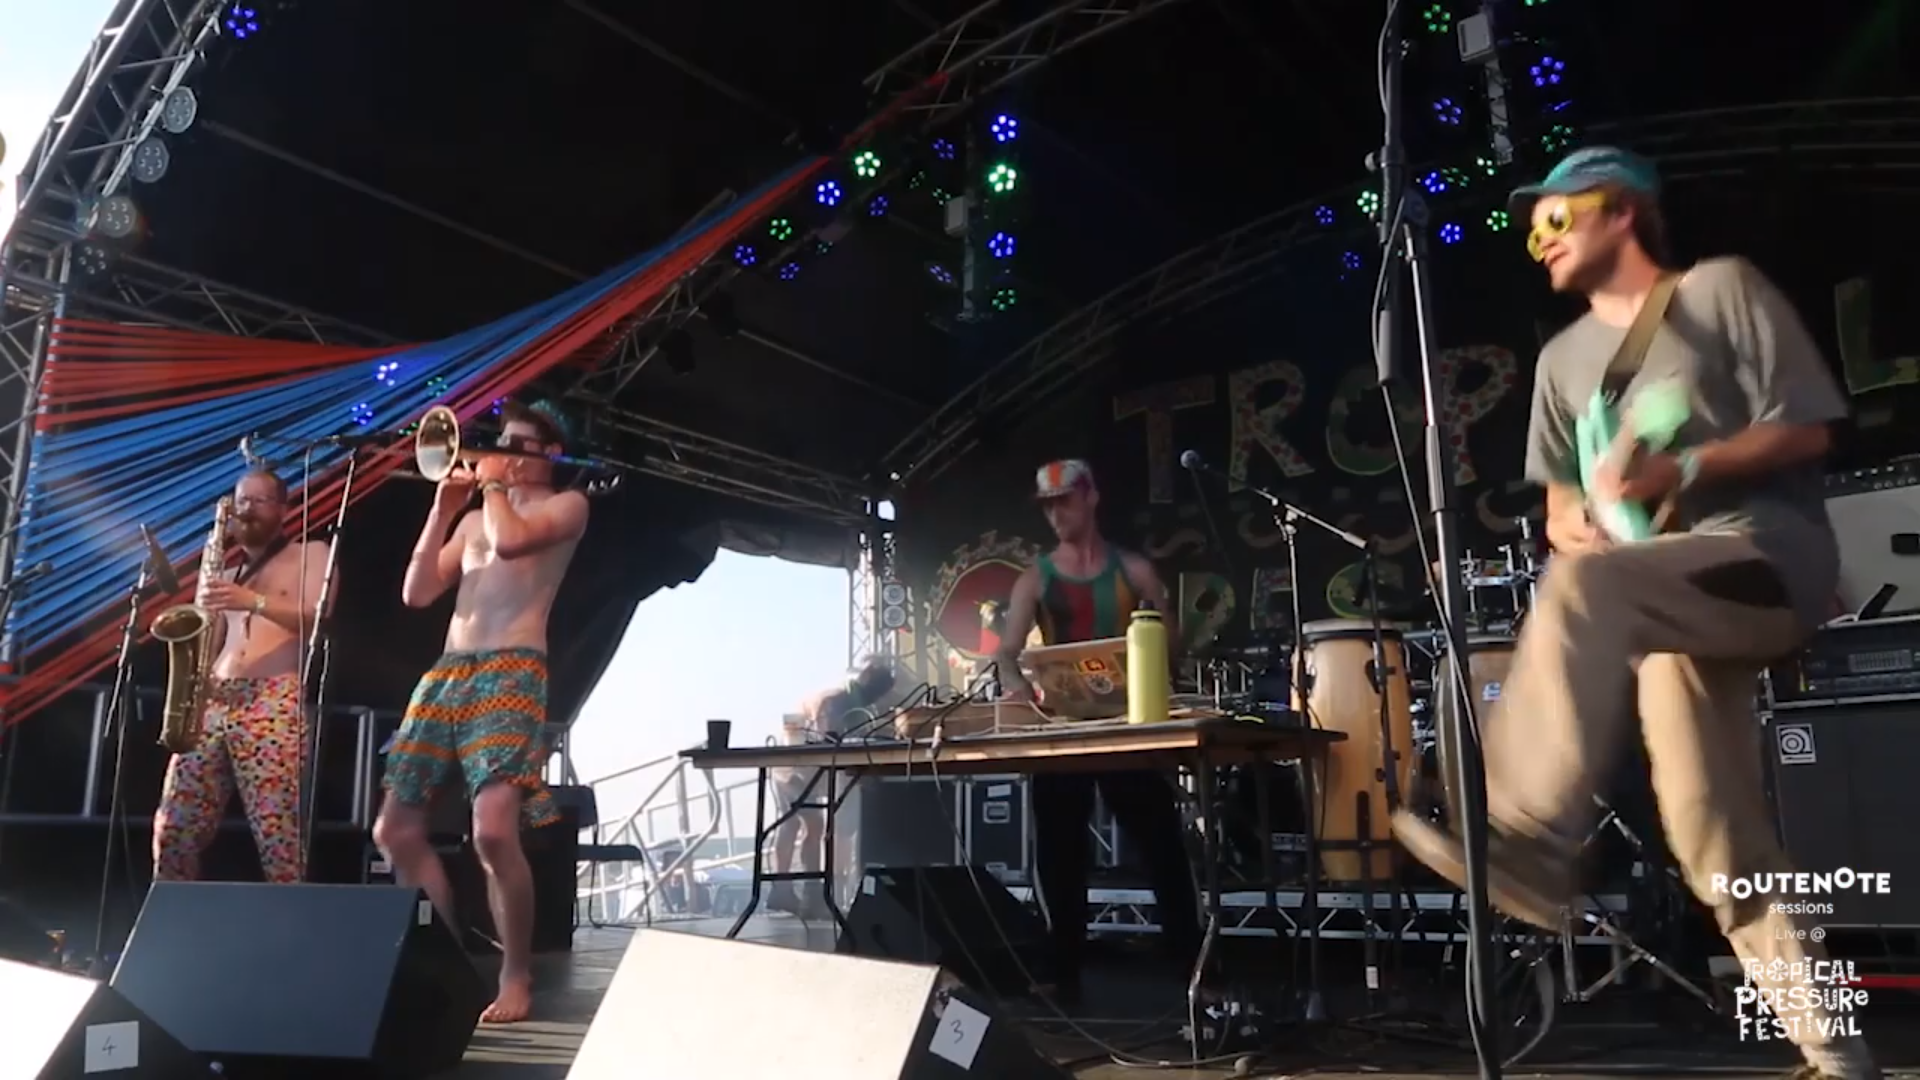 Samson Sounds mash up fat bass and big brass to smash up Tropical Pressure Festival (video)